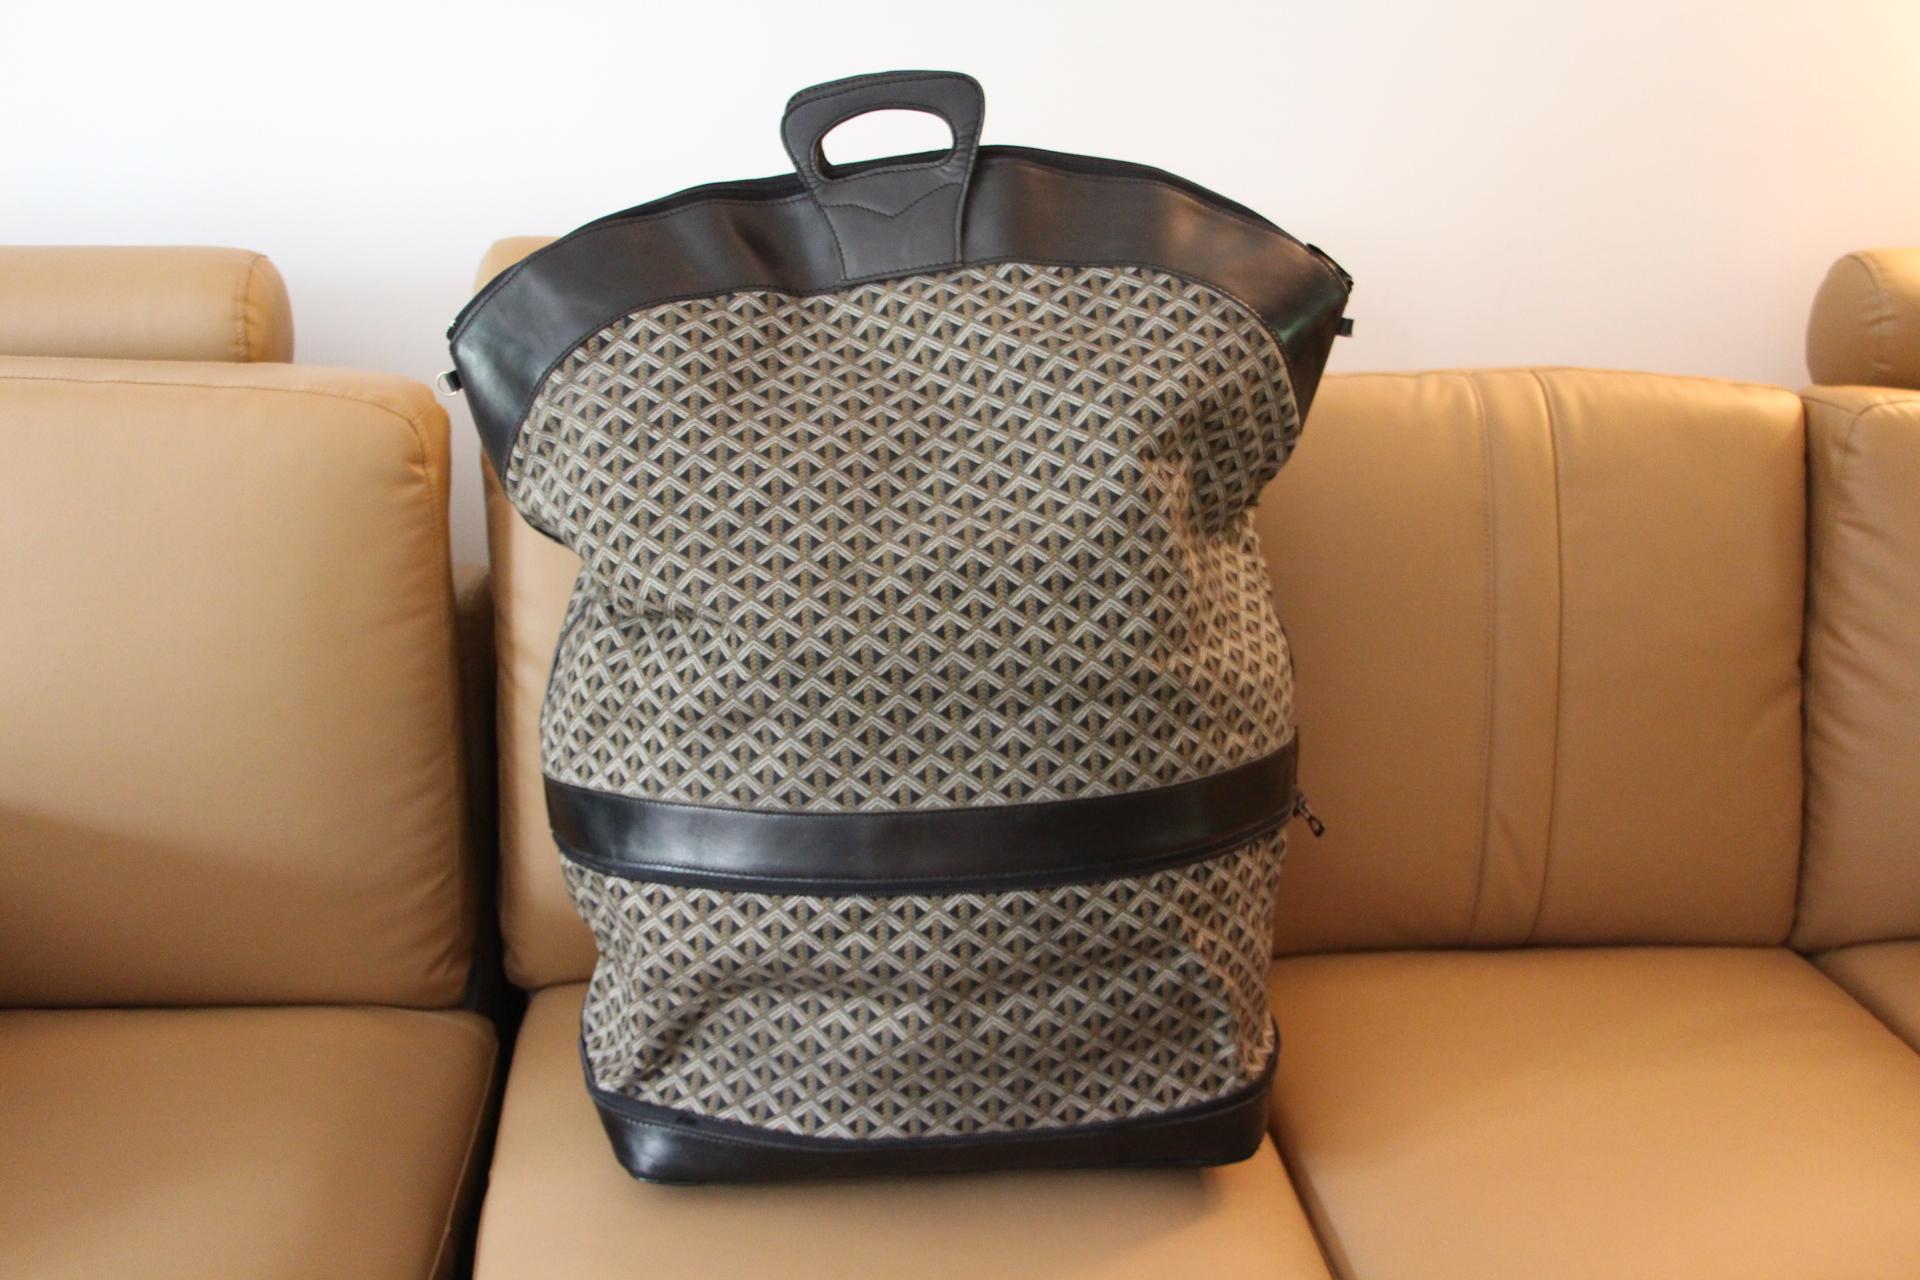 An oversized vintage Goyard travel bag in black leather and woven chevrons canvas with a yellow colored canvas interior.
Its two large leather handles are very sturdy and very comfortable.All its bottom section is black leather.
At the end of the